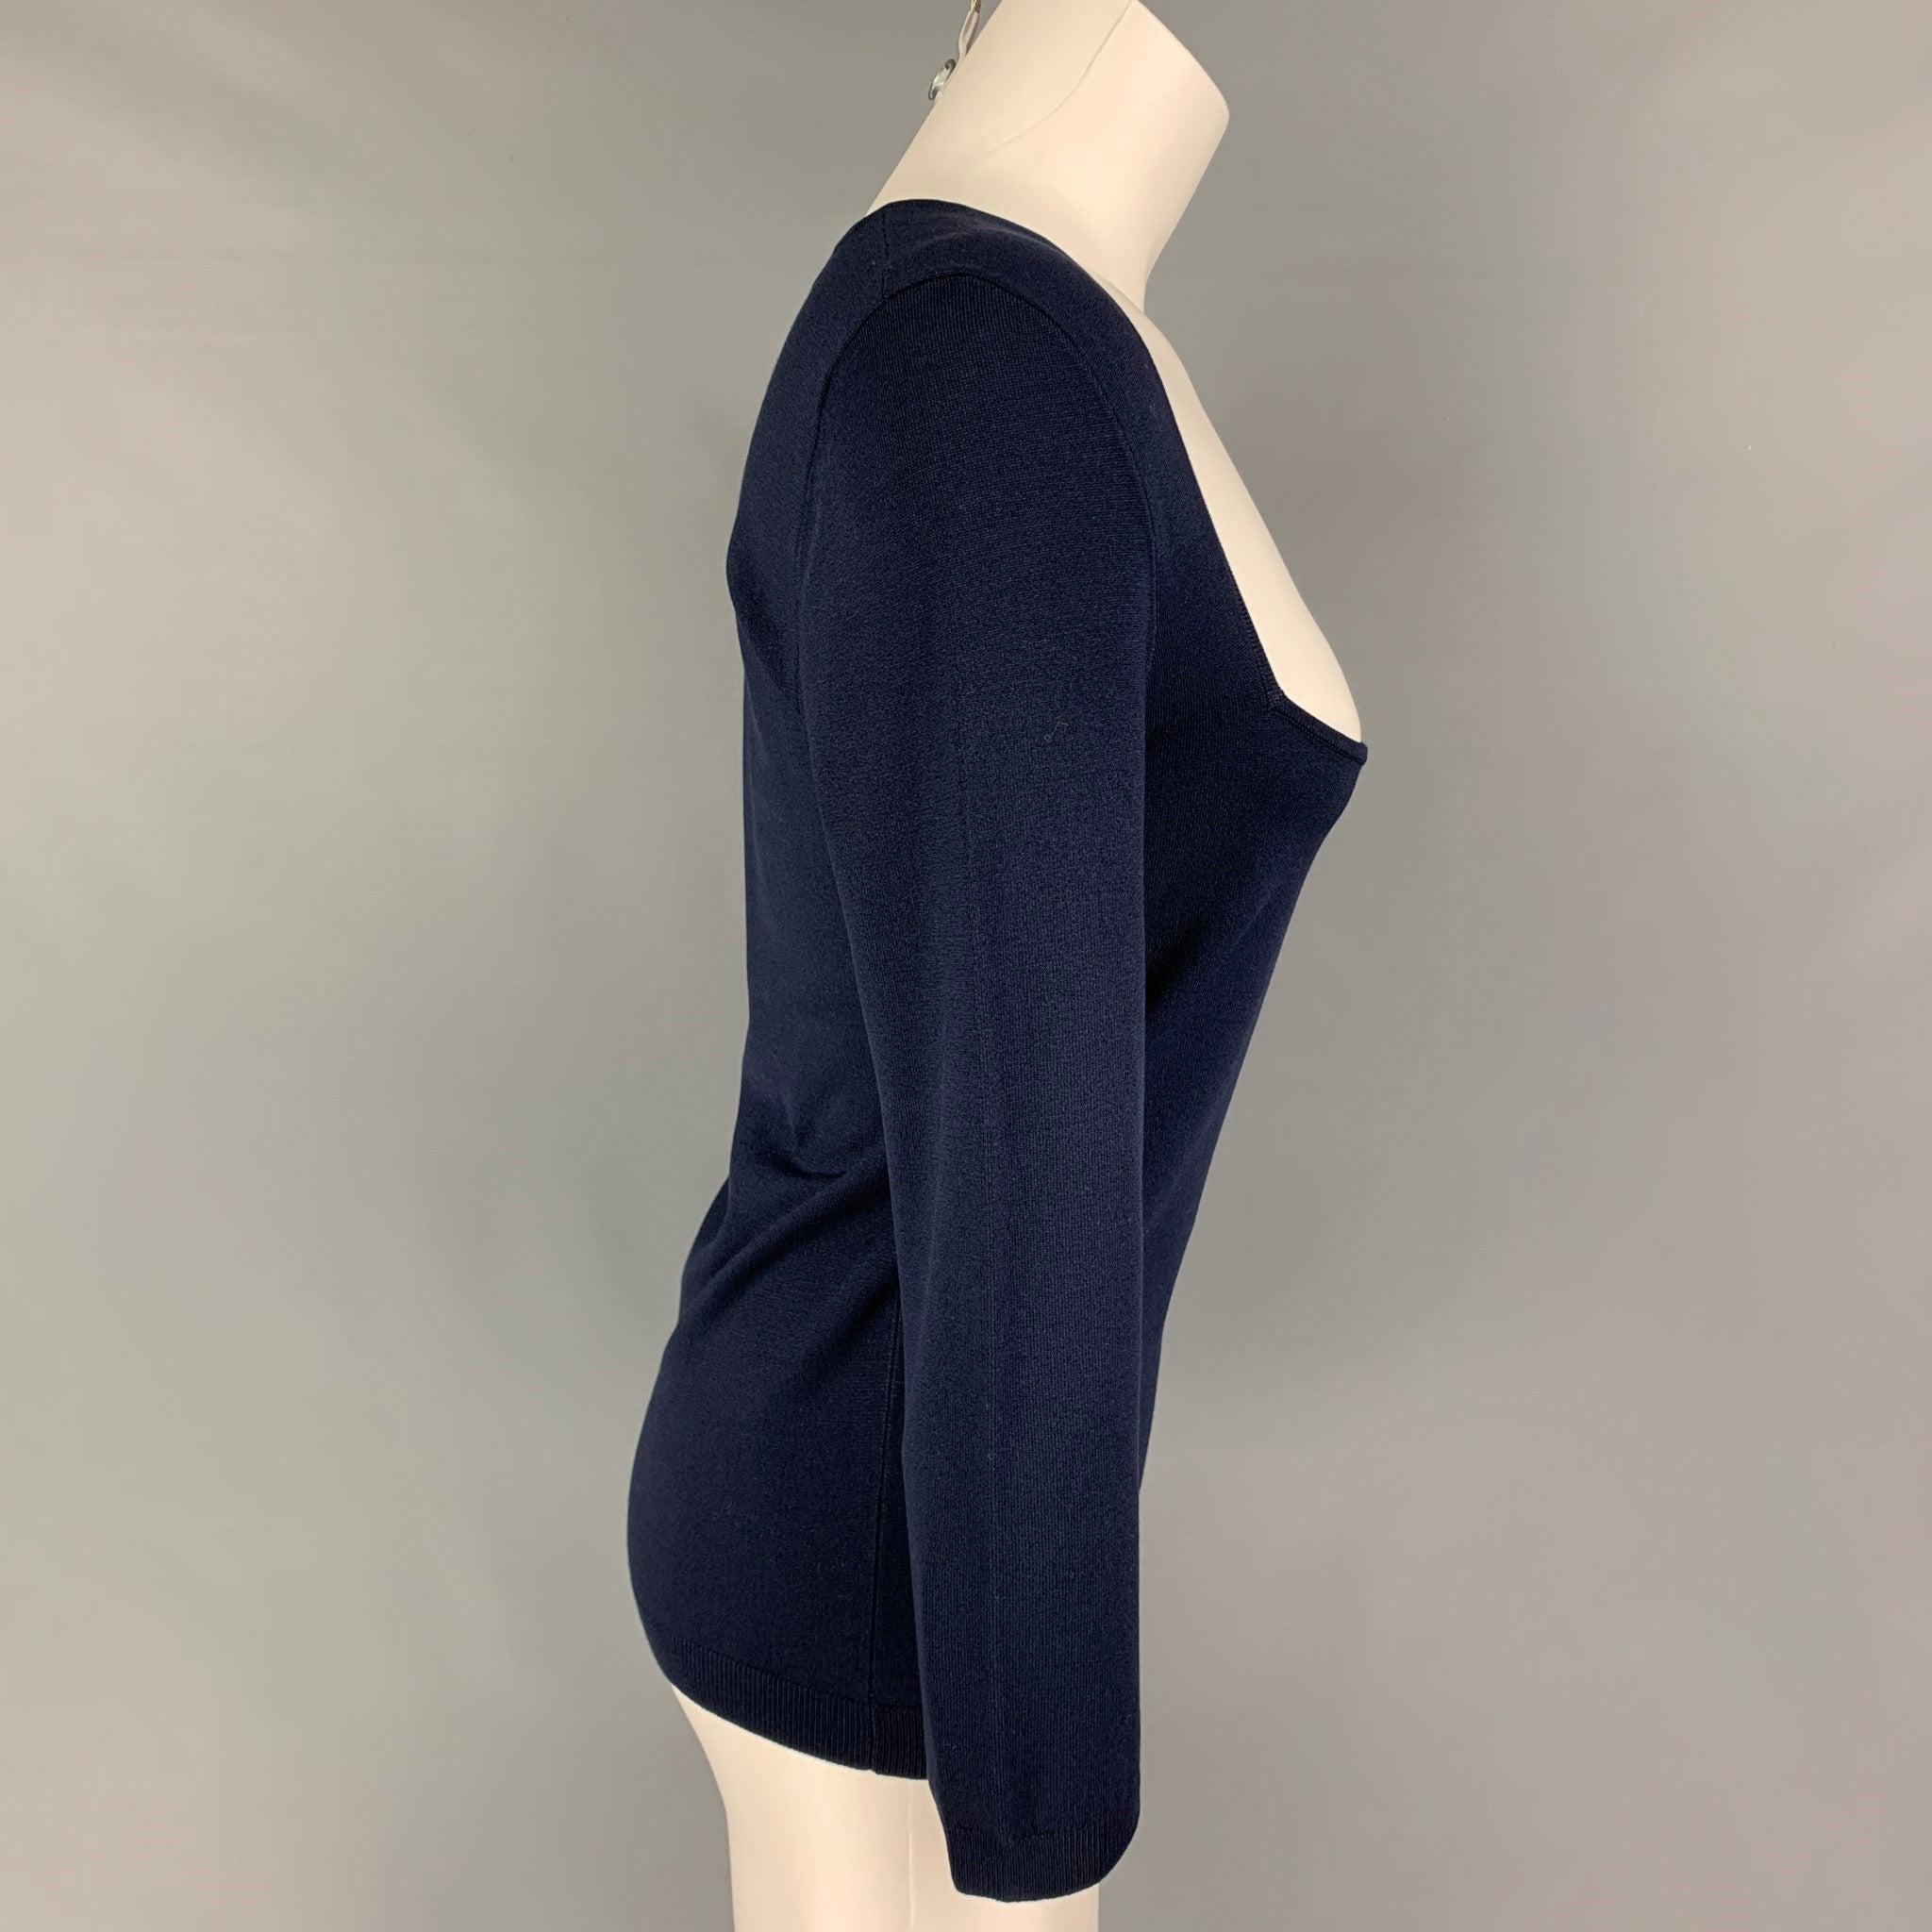 RALPH LAUREN 'Black Label' pullover comes in a navy jersey silk blend featuring a deep neckline.
Very Good
Pre-Owned Condition. 

Marked:   M  

Measurements: 
 
Shoulder: 16.5 inches  Bust:
32 inches  Sleeve: 23 inches  Length: 24 inches 
  
  
